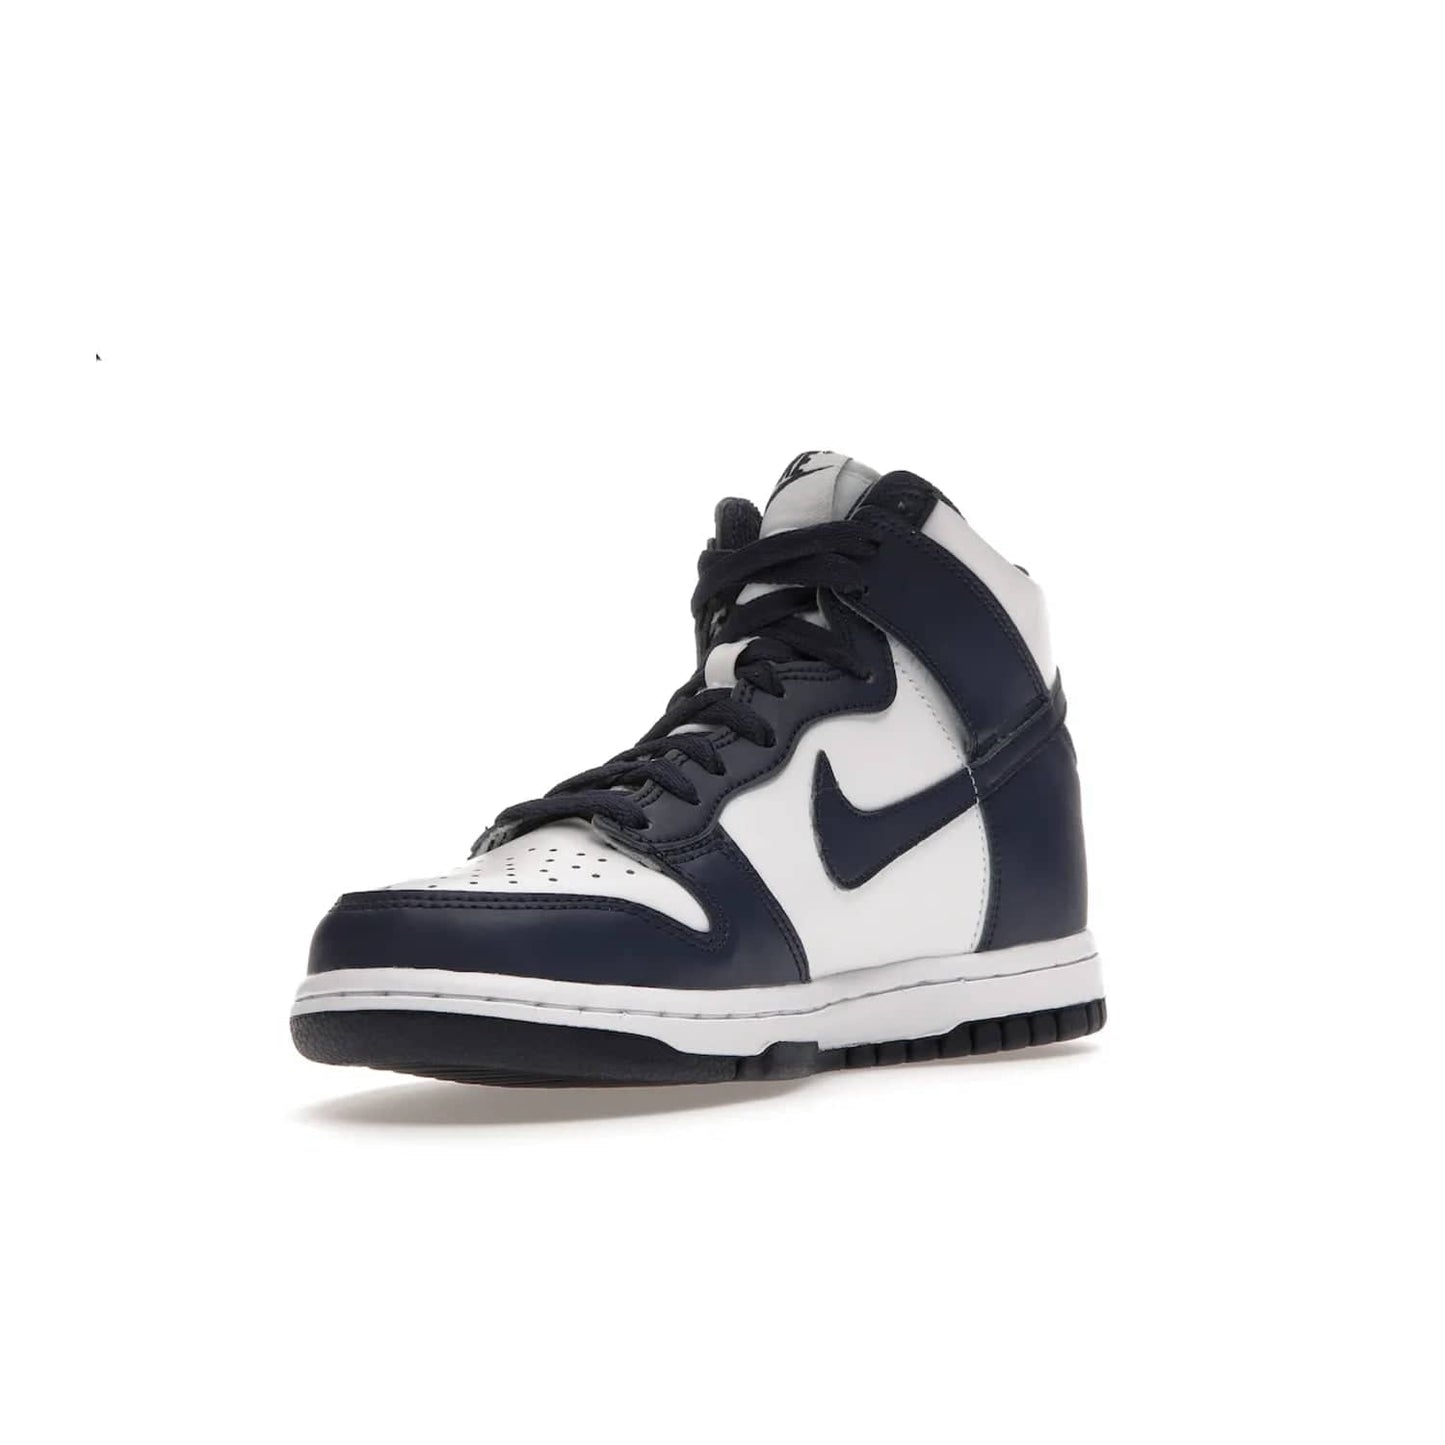 Nike Dunk High Championship Navy (GS) - Image 14 - Only at www.BallersClubKickz.com - Nike Dunk High Championship Navy GS: classic leather, suede, synthetic upper, chunky midsole, rubber herringbone sole. White base overlaid with Midnight Navy for a stylish finish. Padded high-cut collar and signature Nike swoosh design. Step out in these shoes and make a statement. Comfort and style at its finest.